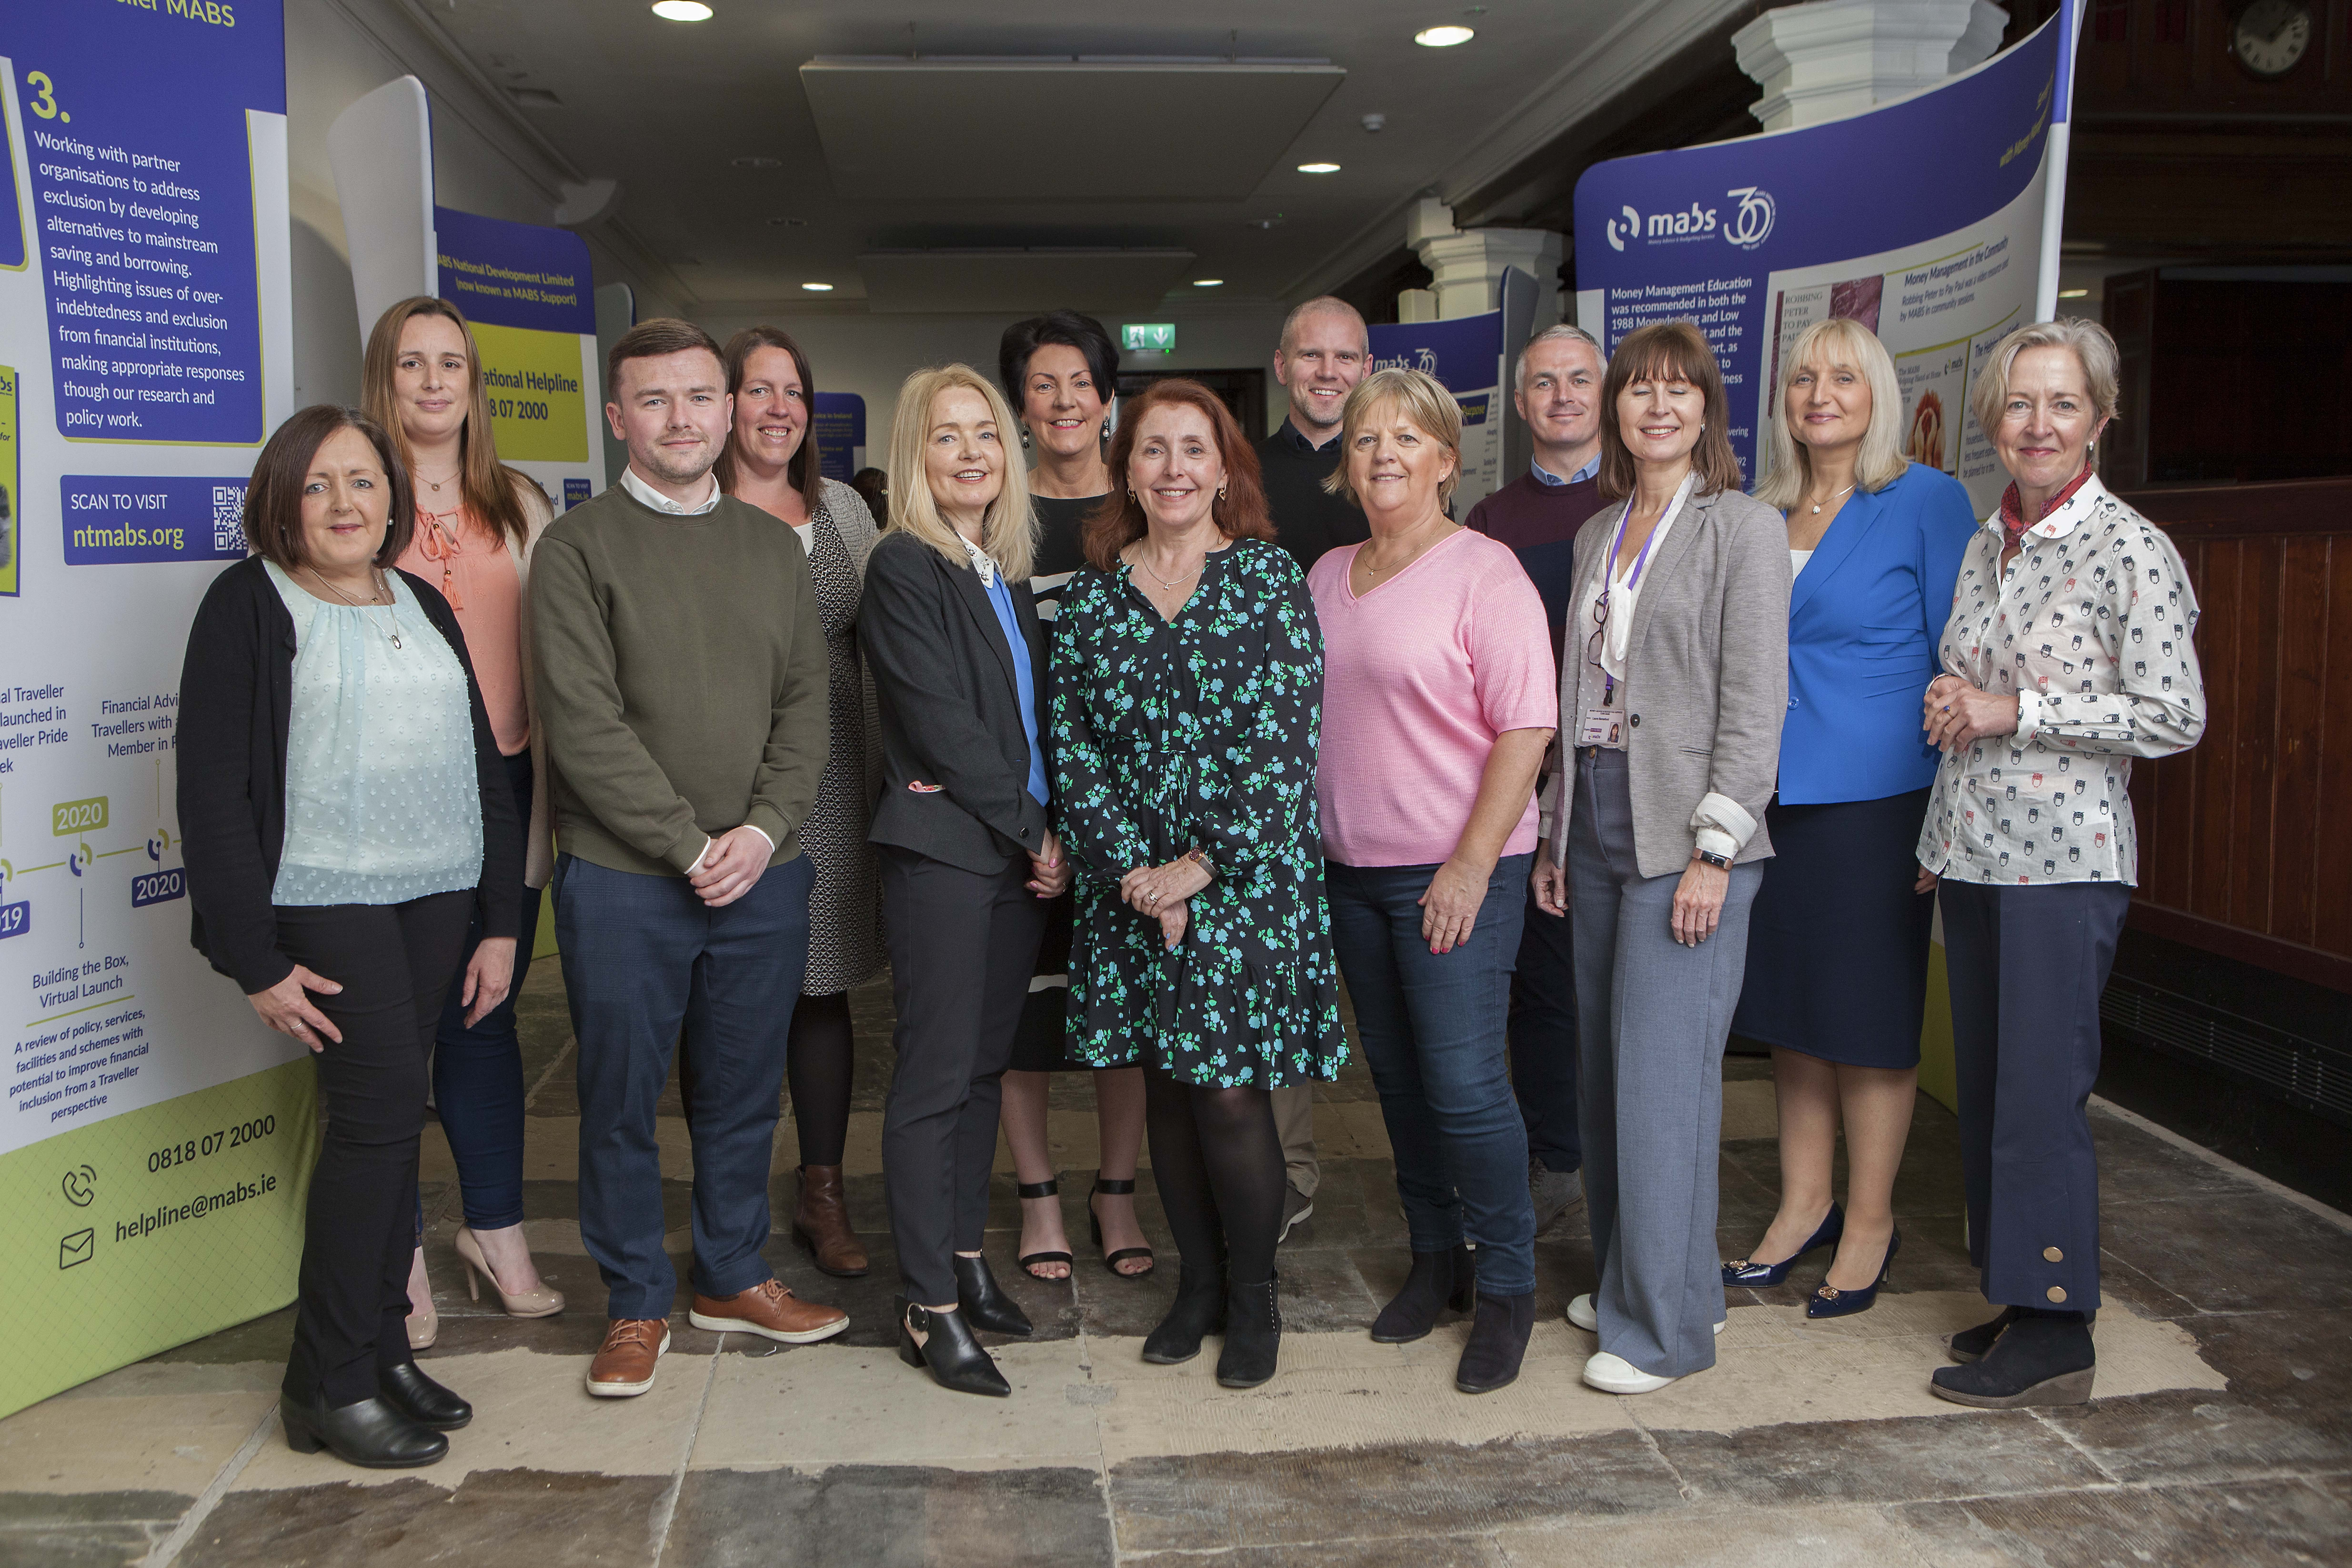 MABS staff pictured in front of the exhibition stands covering the milestone events throughout the 30 years MABS has been serving the community.